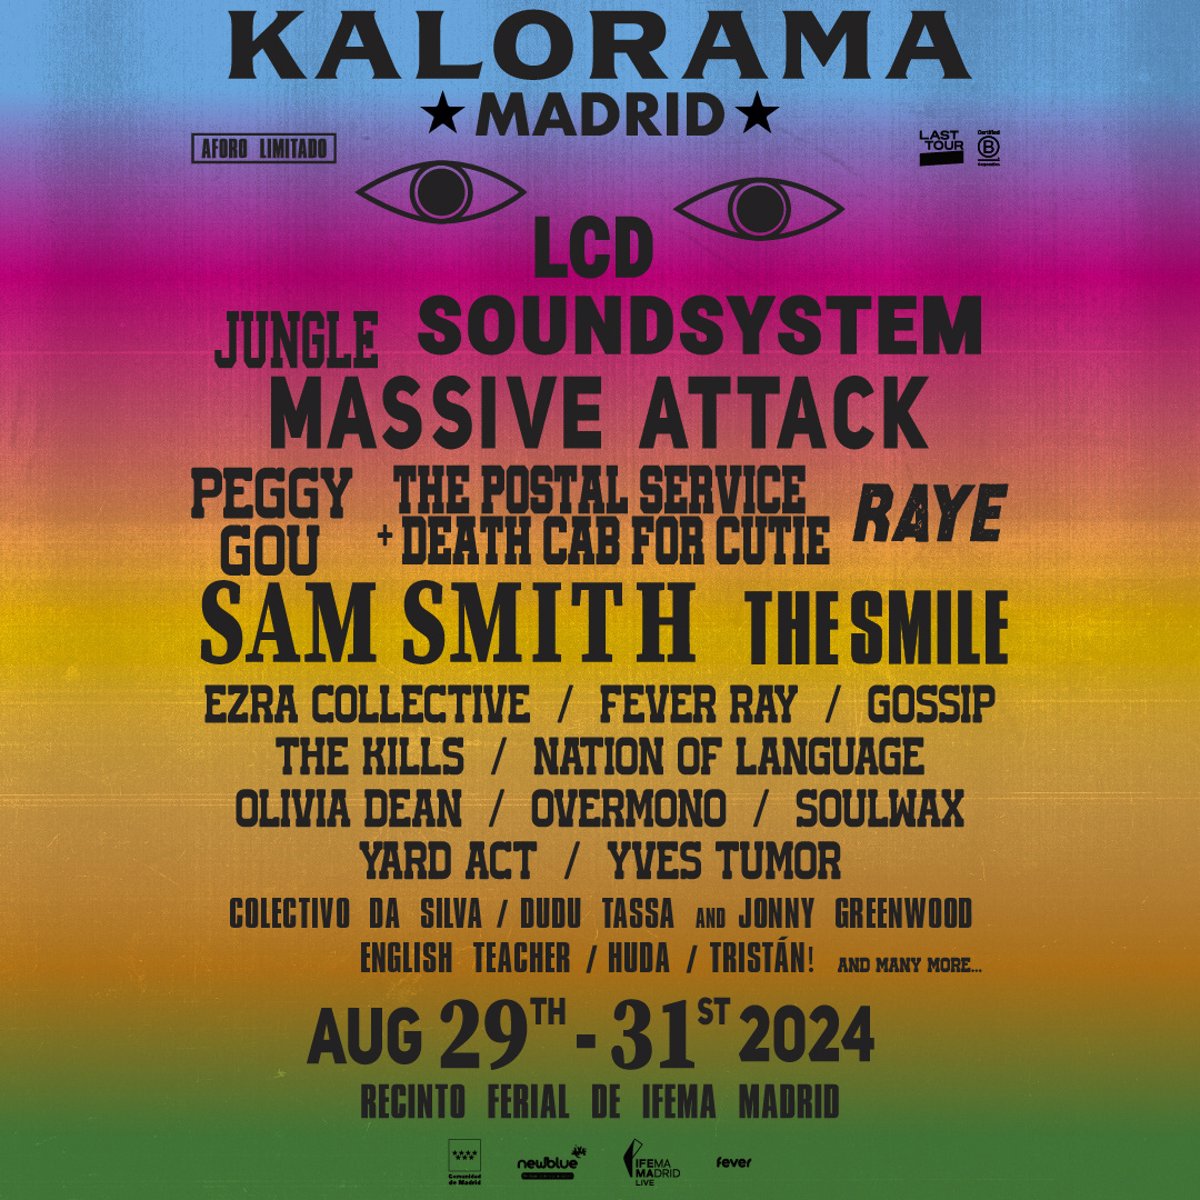 KALORAMA Festival brings together figures such as Jungle, LCD Soundsystem, Peggy Gou, Raye and Sam Smith in August in Madrid